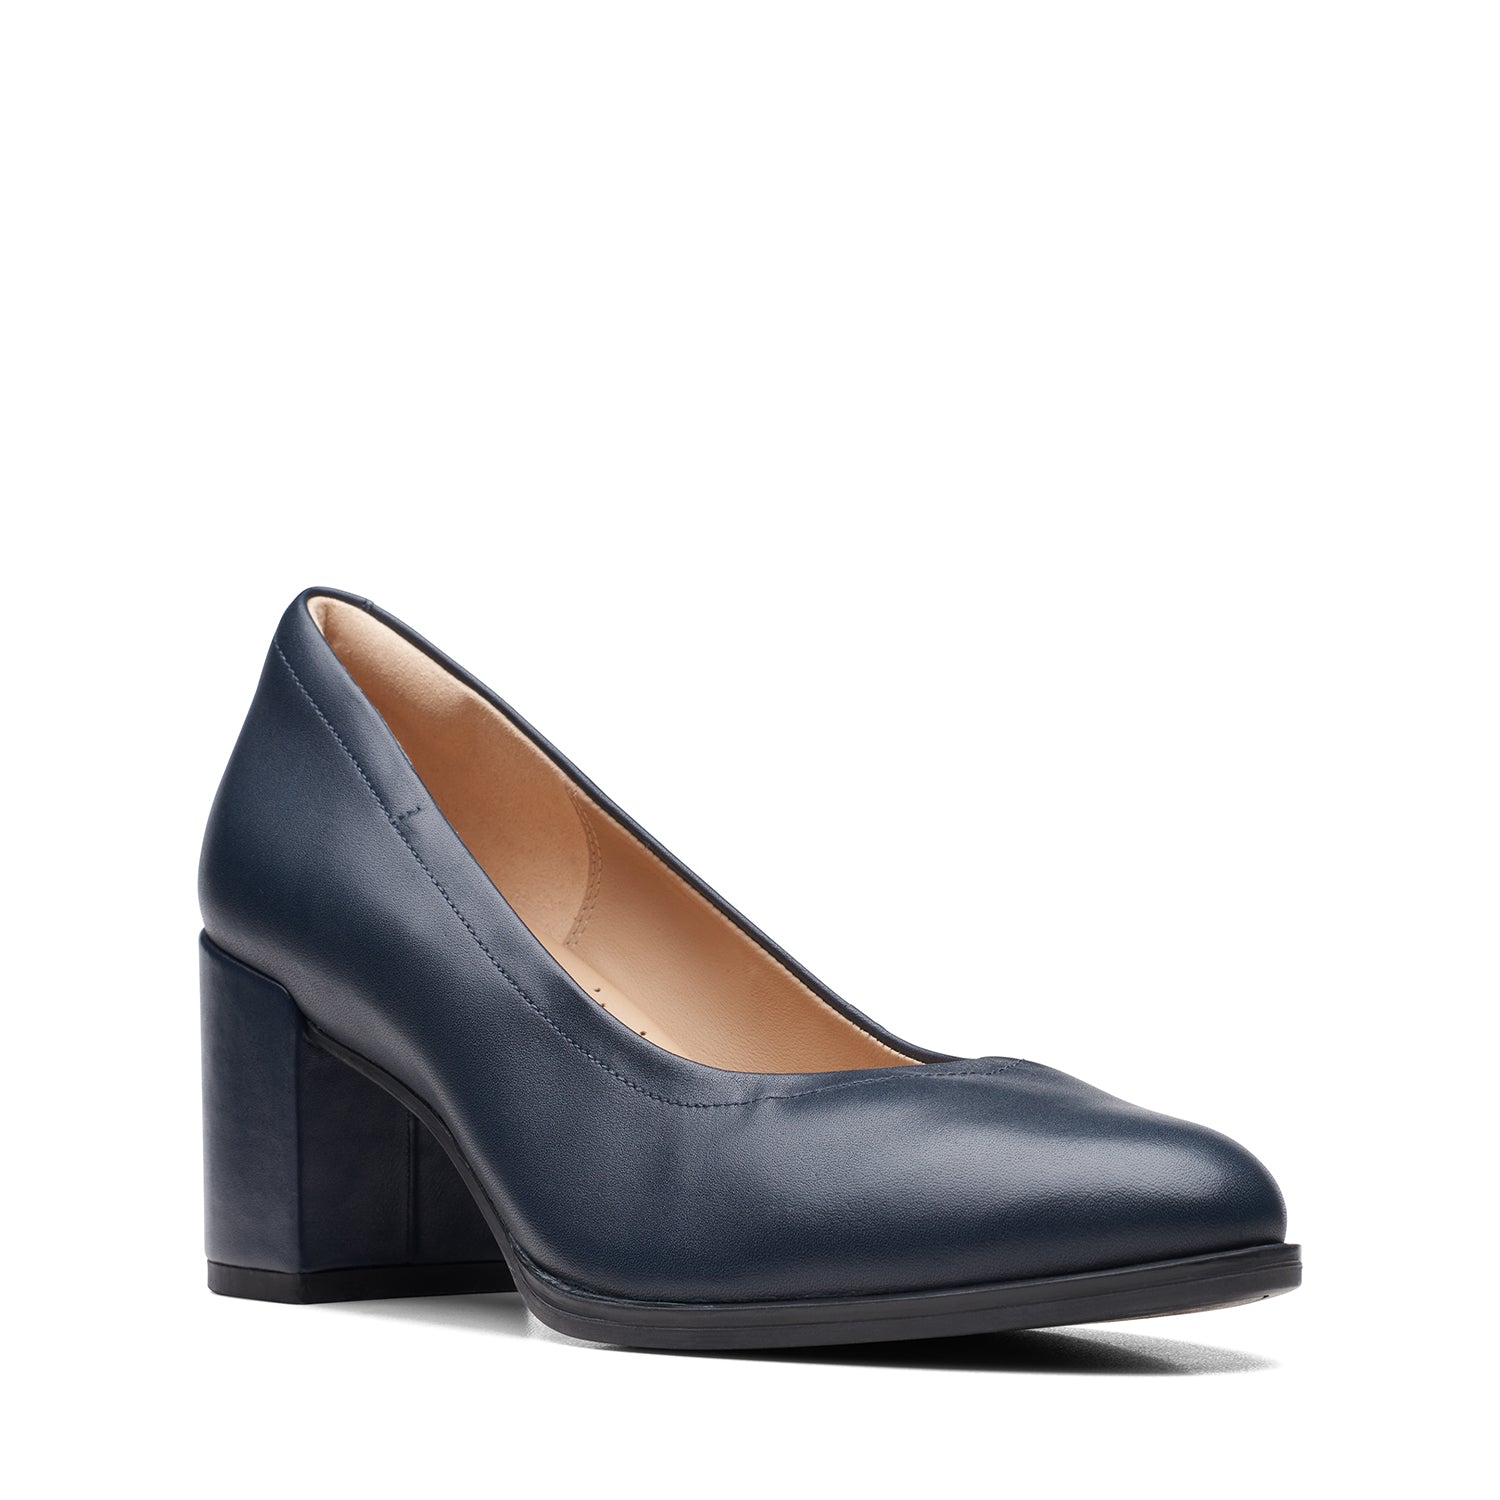 Clarks Freva55 Court Shoes - Navy Leather - 261718774 - D Width (Standard Fit)